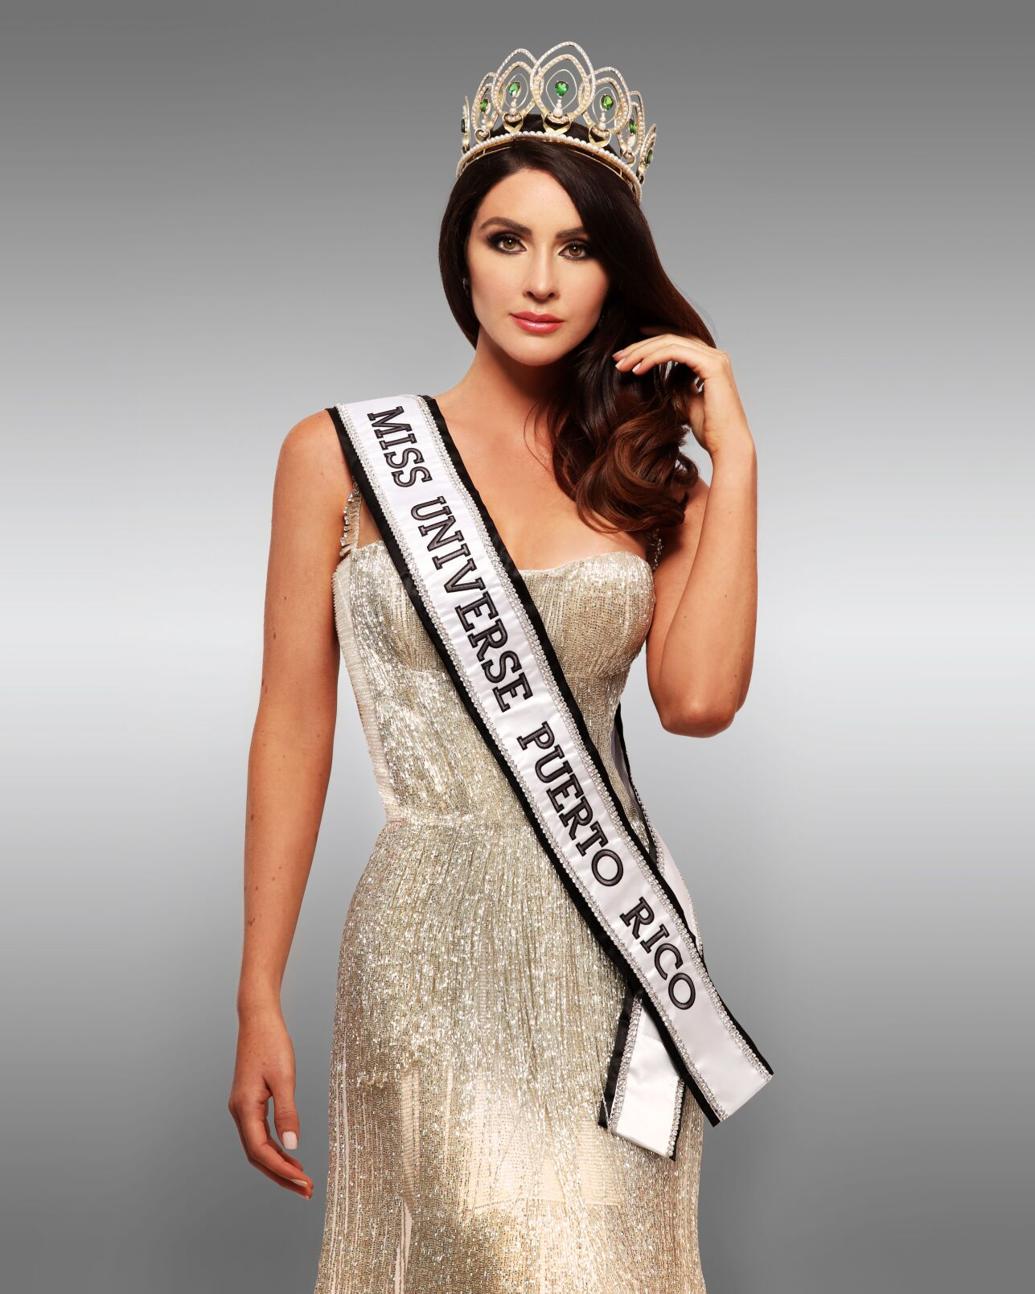 Miss Universe Puerto Rico Ready to Serve as Ambassador for the Island